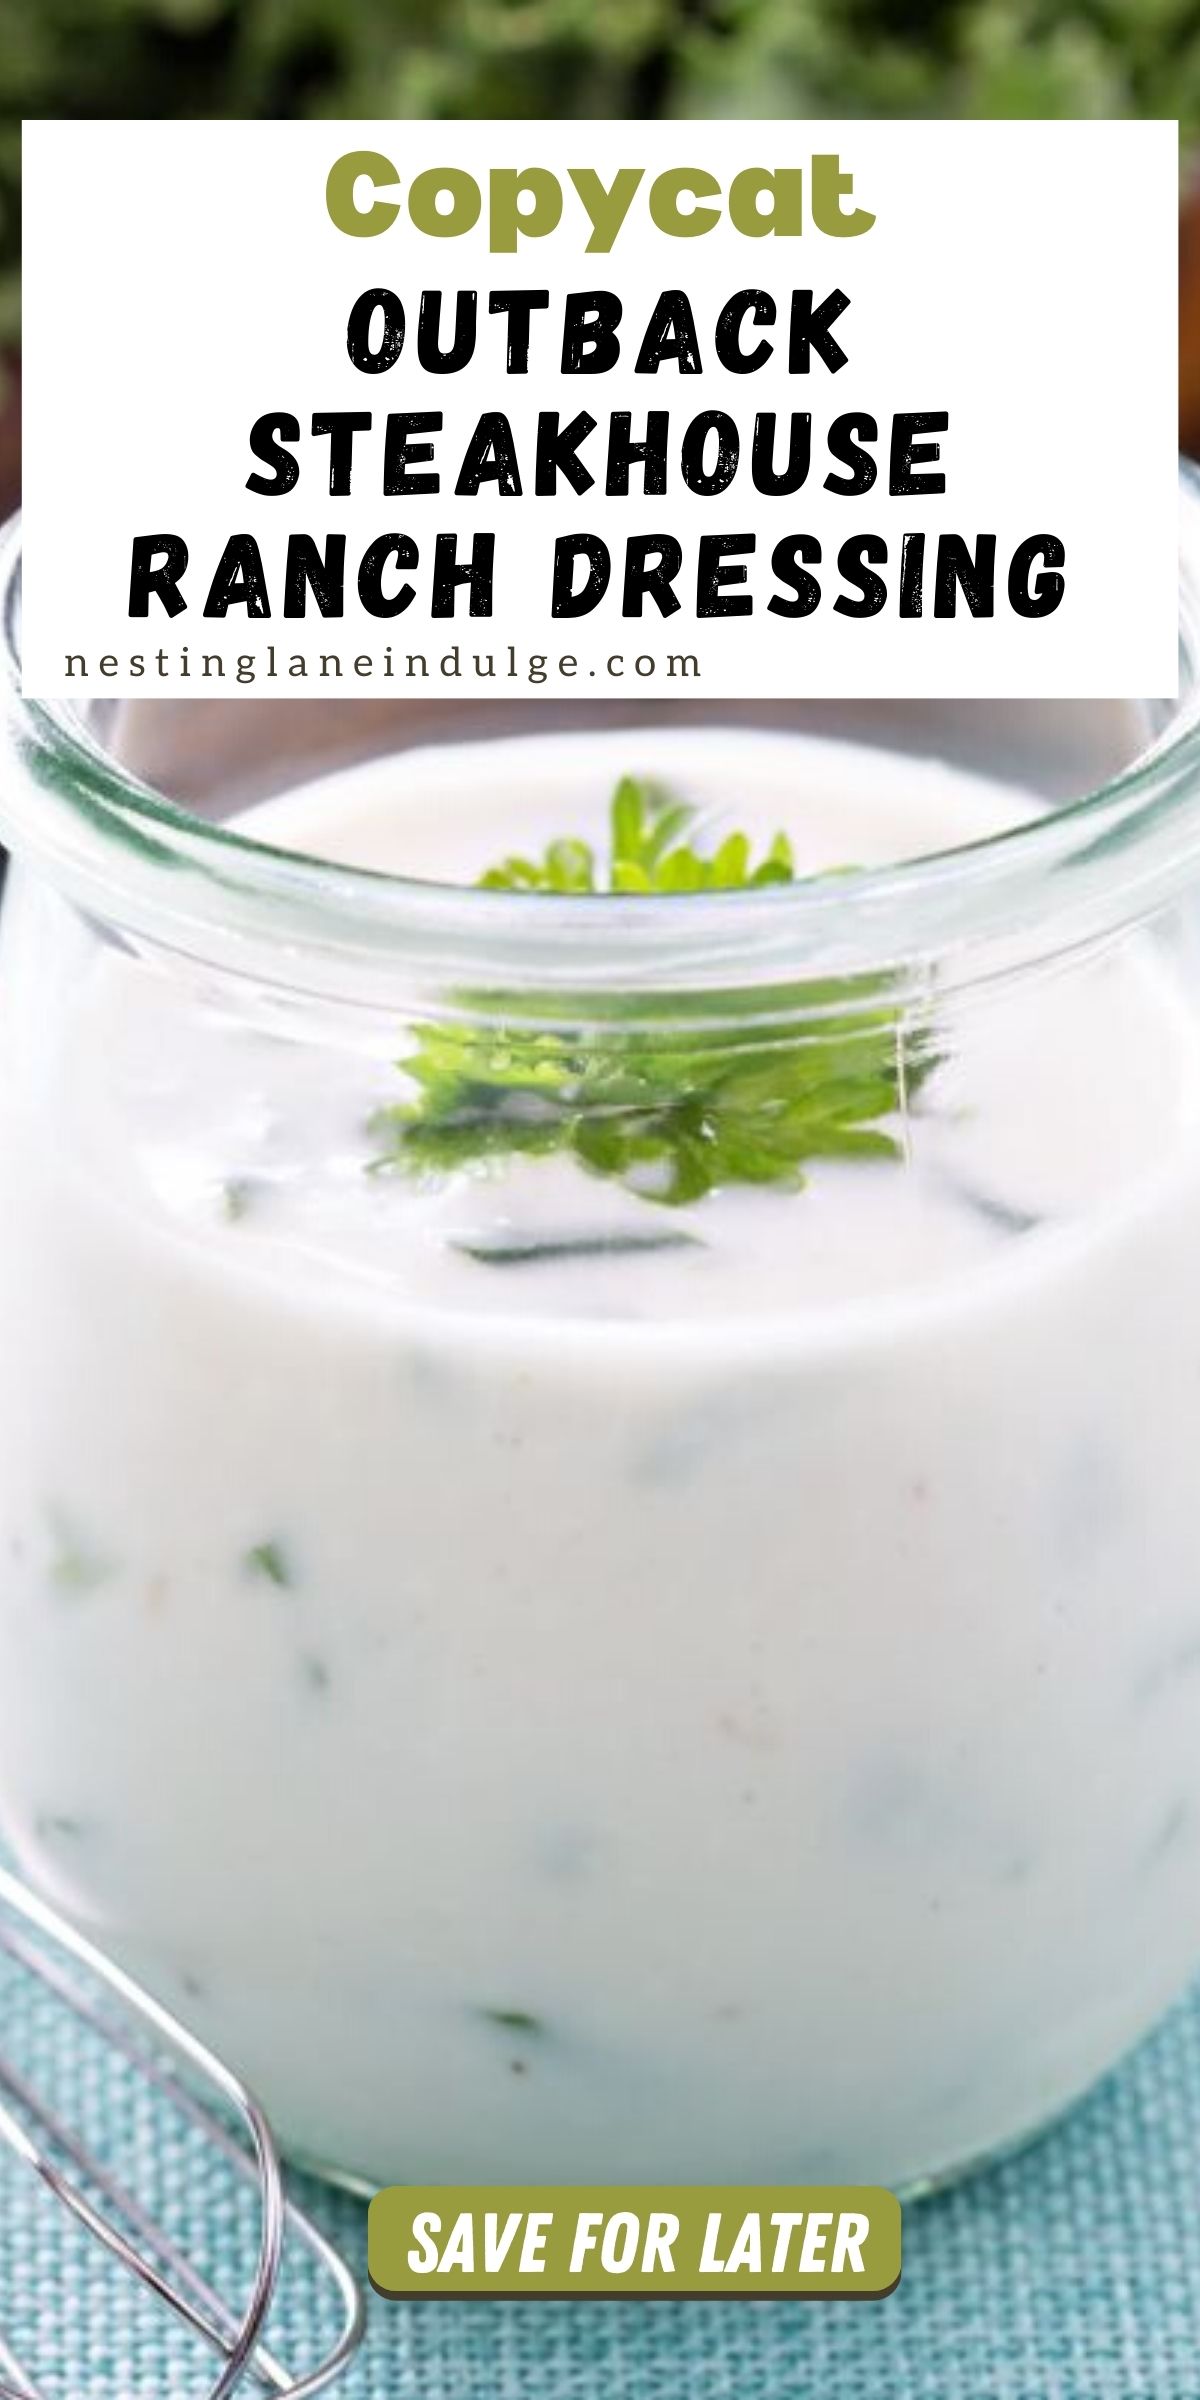 Ranch Dressing (Copycat Outback Steakhouse) Graphic.